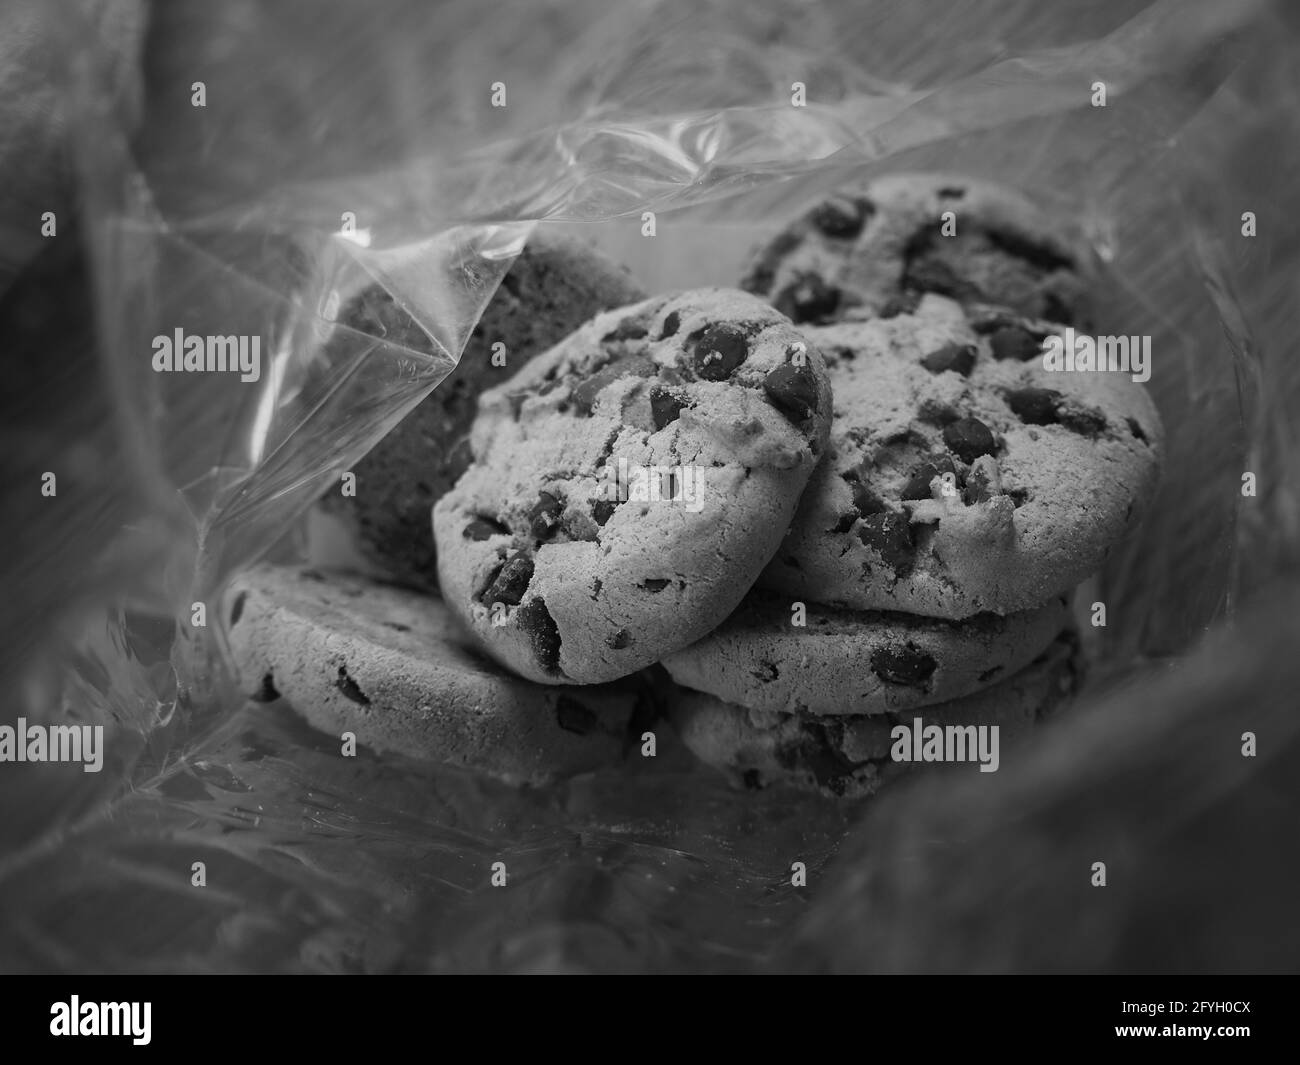 Grayscale of chocolate chip cookies in plastic bag Stock Photo